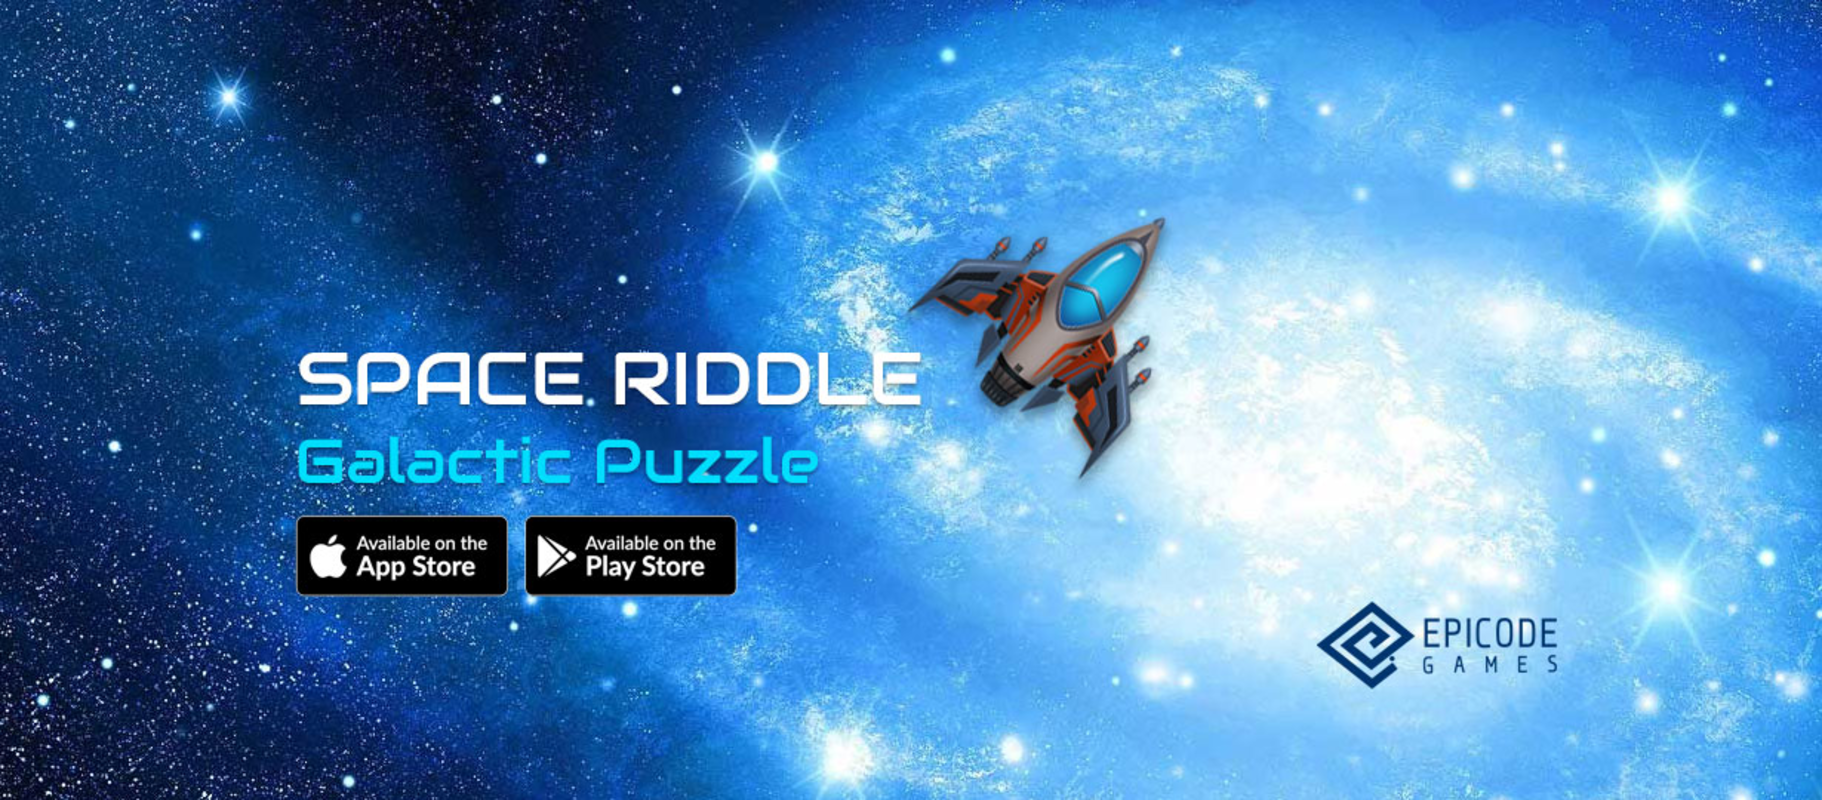 Play Space Riddle Brain Puzzle